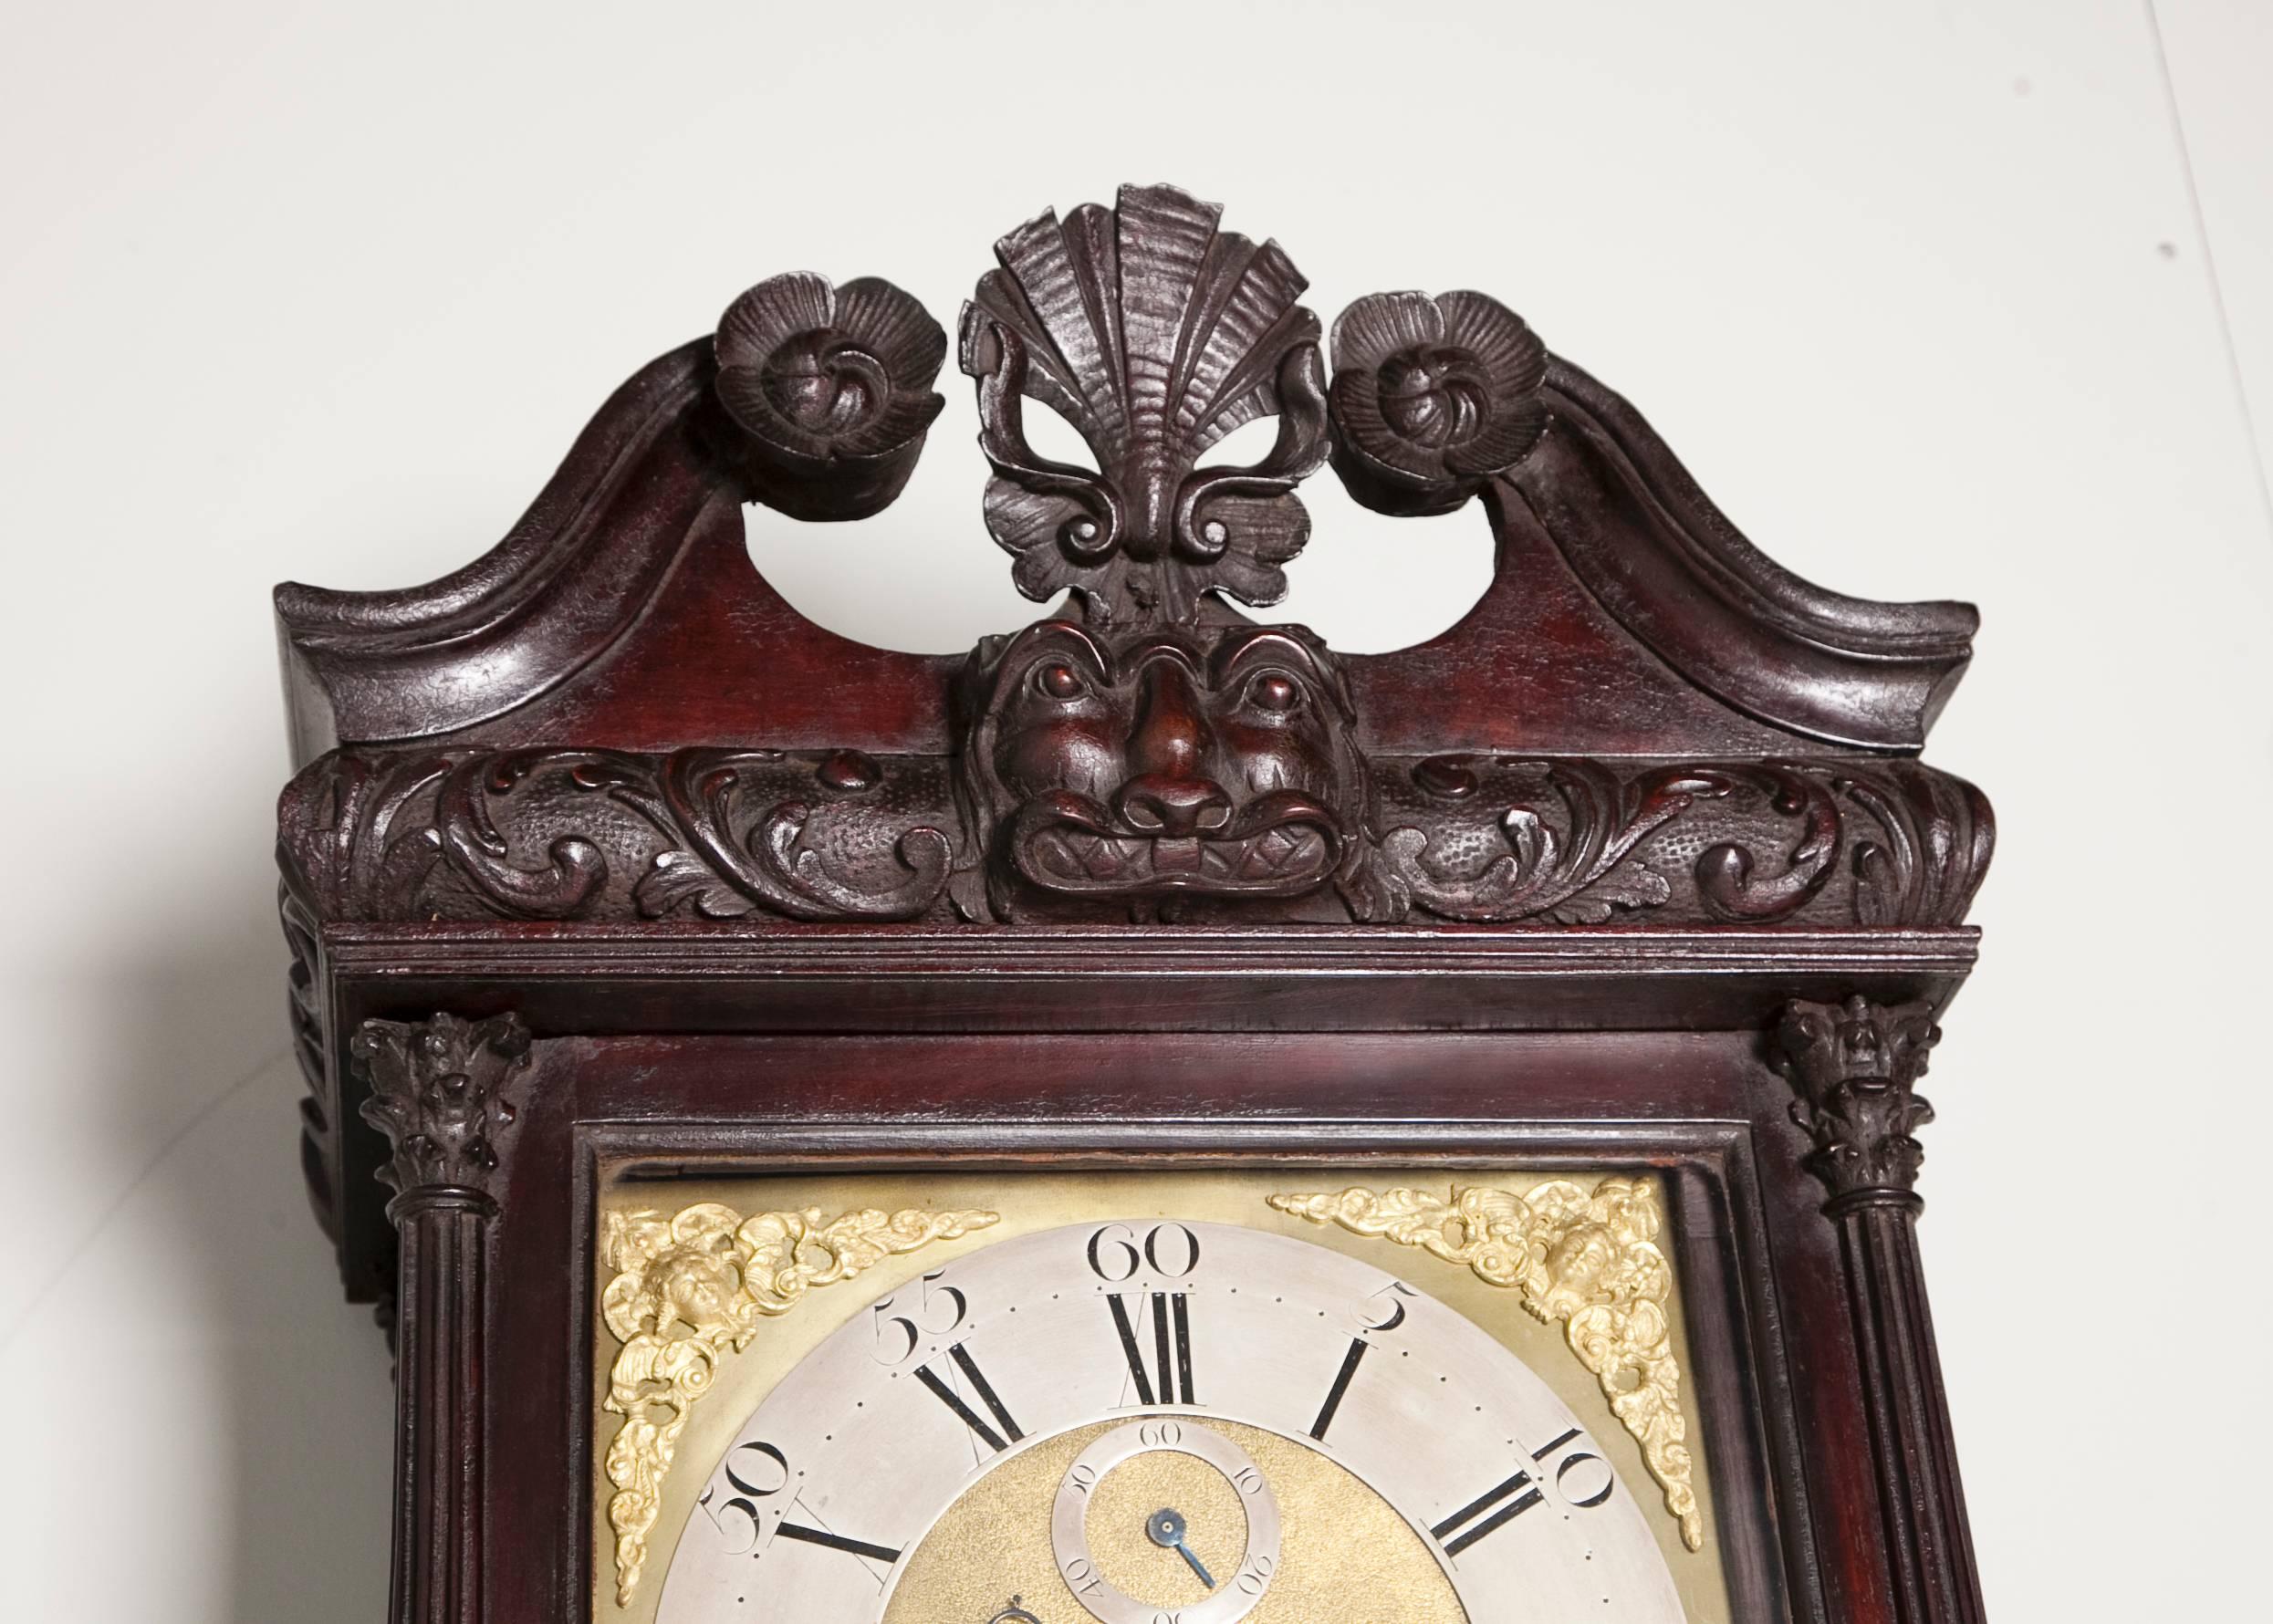 A good Irish long case clock by Thomas Blundel. The case with a swan neck top curved with an Irish mask on a cushion moulding of acanthus with carved rosettes, supported by fluted columns and a long central door, retaining good original color and